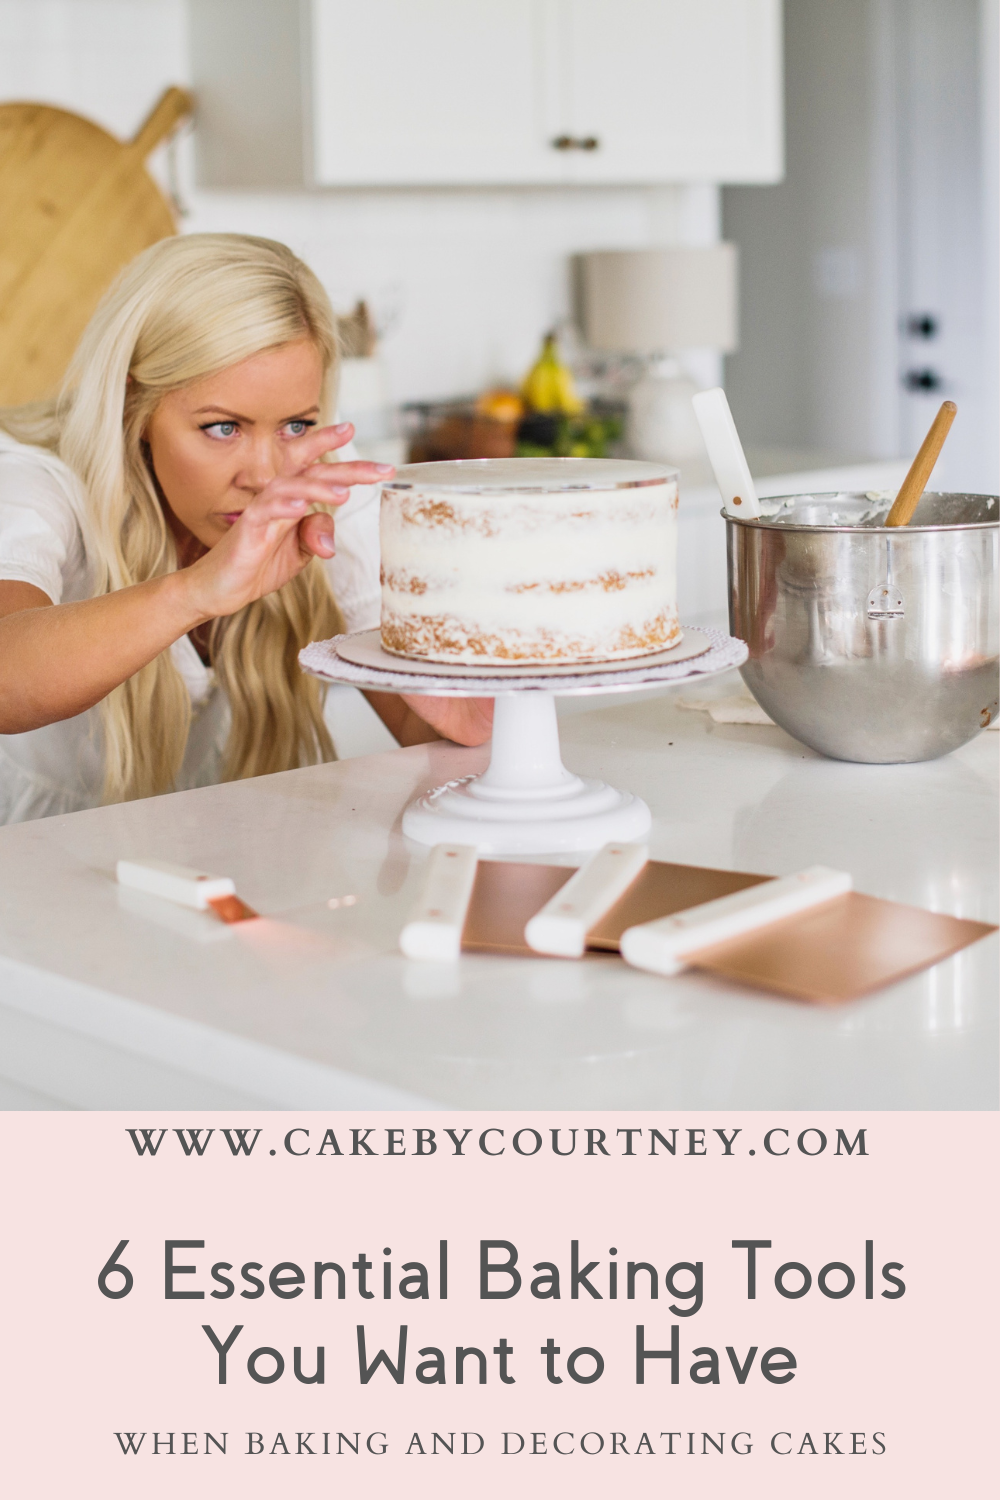 6 essential baking tool you want to have. www.cakebycourtney.com